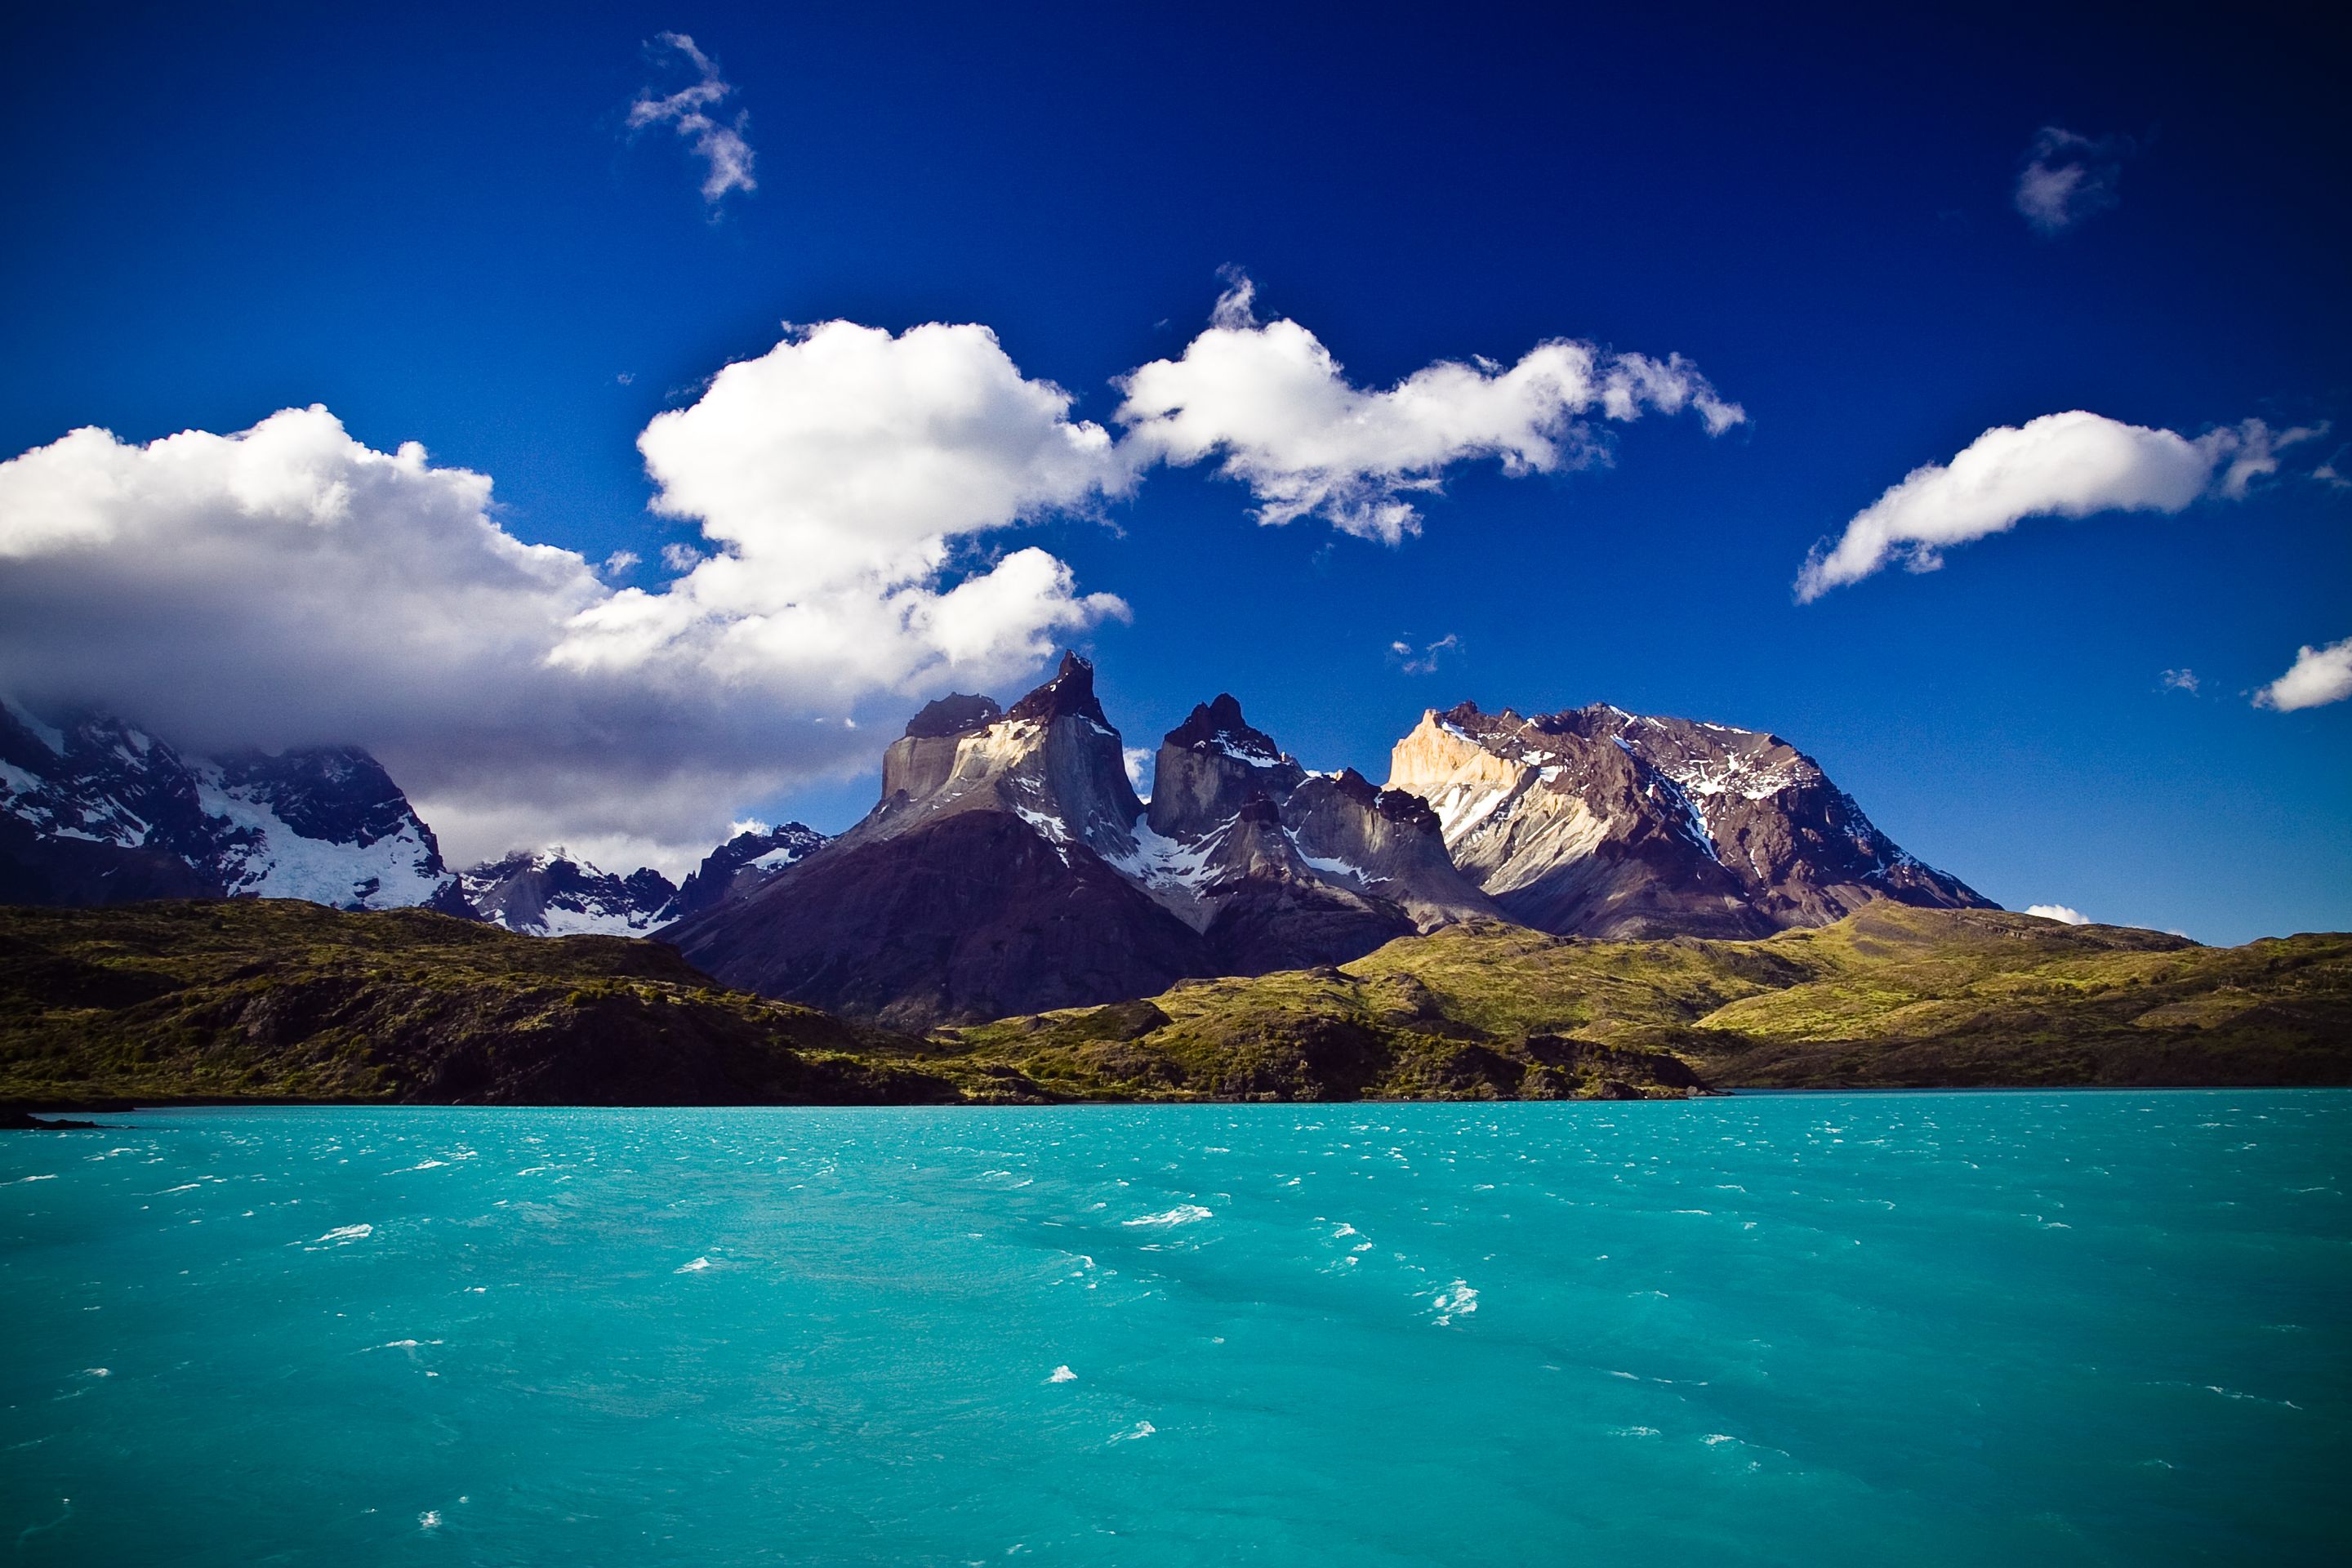 torres del paine, mountain, earth, blue, lake, mountains